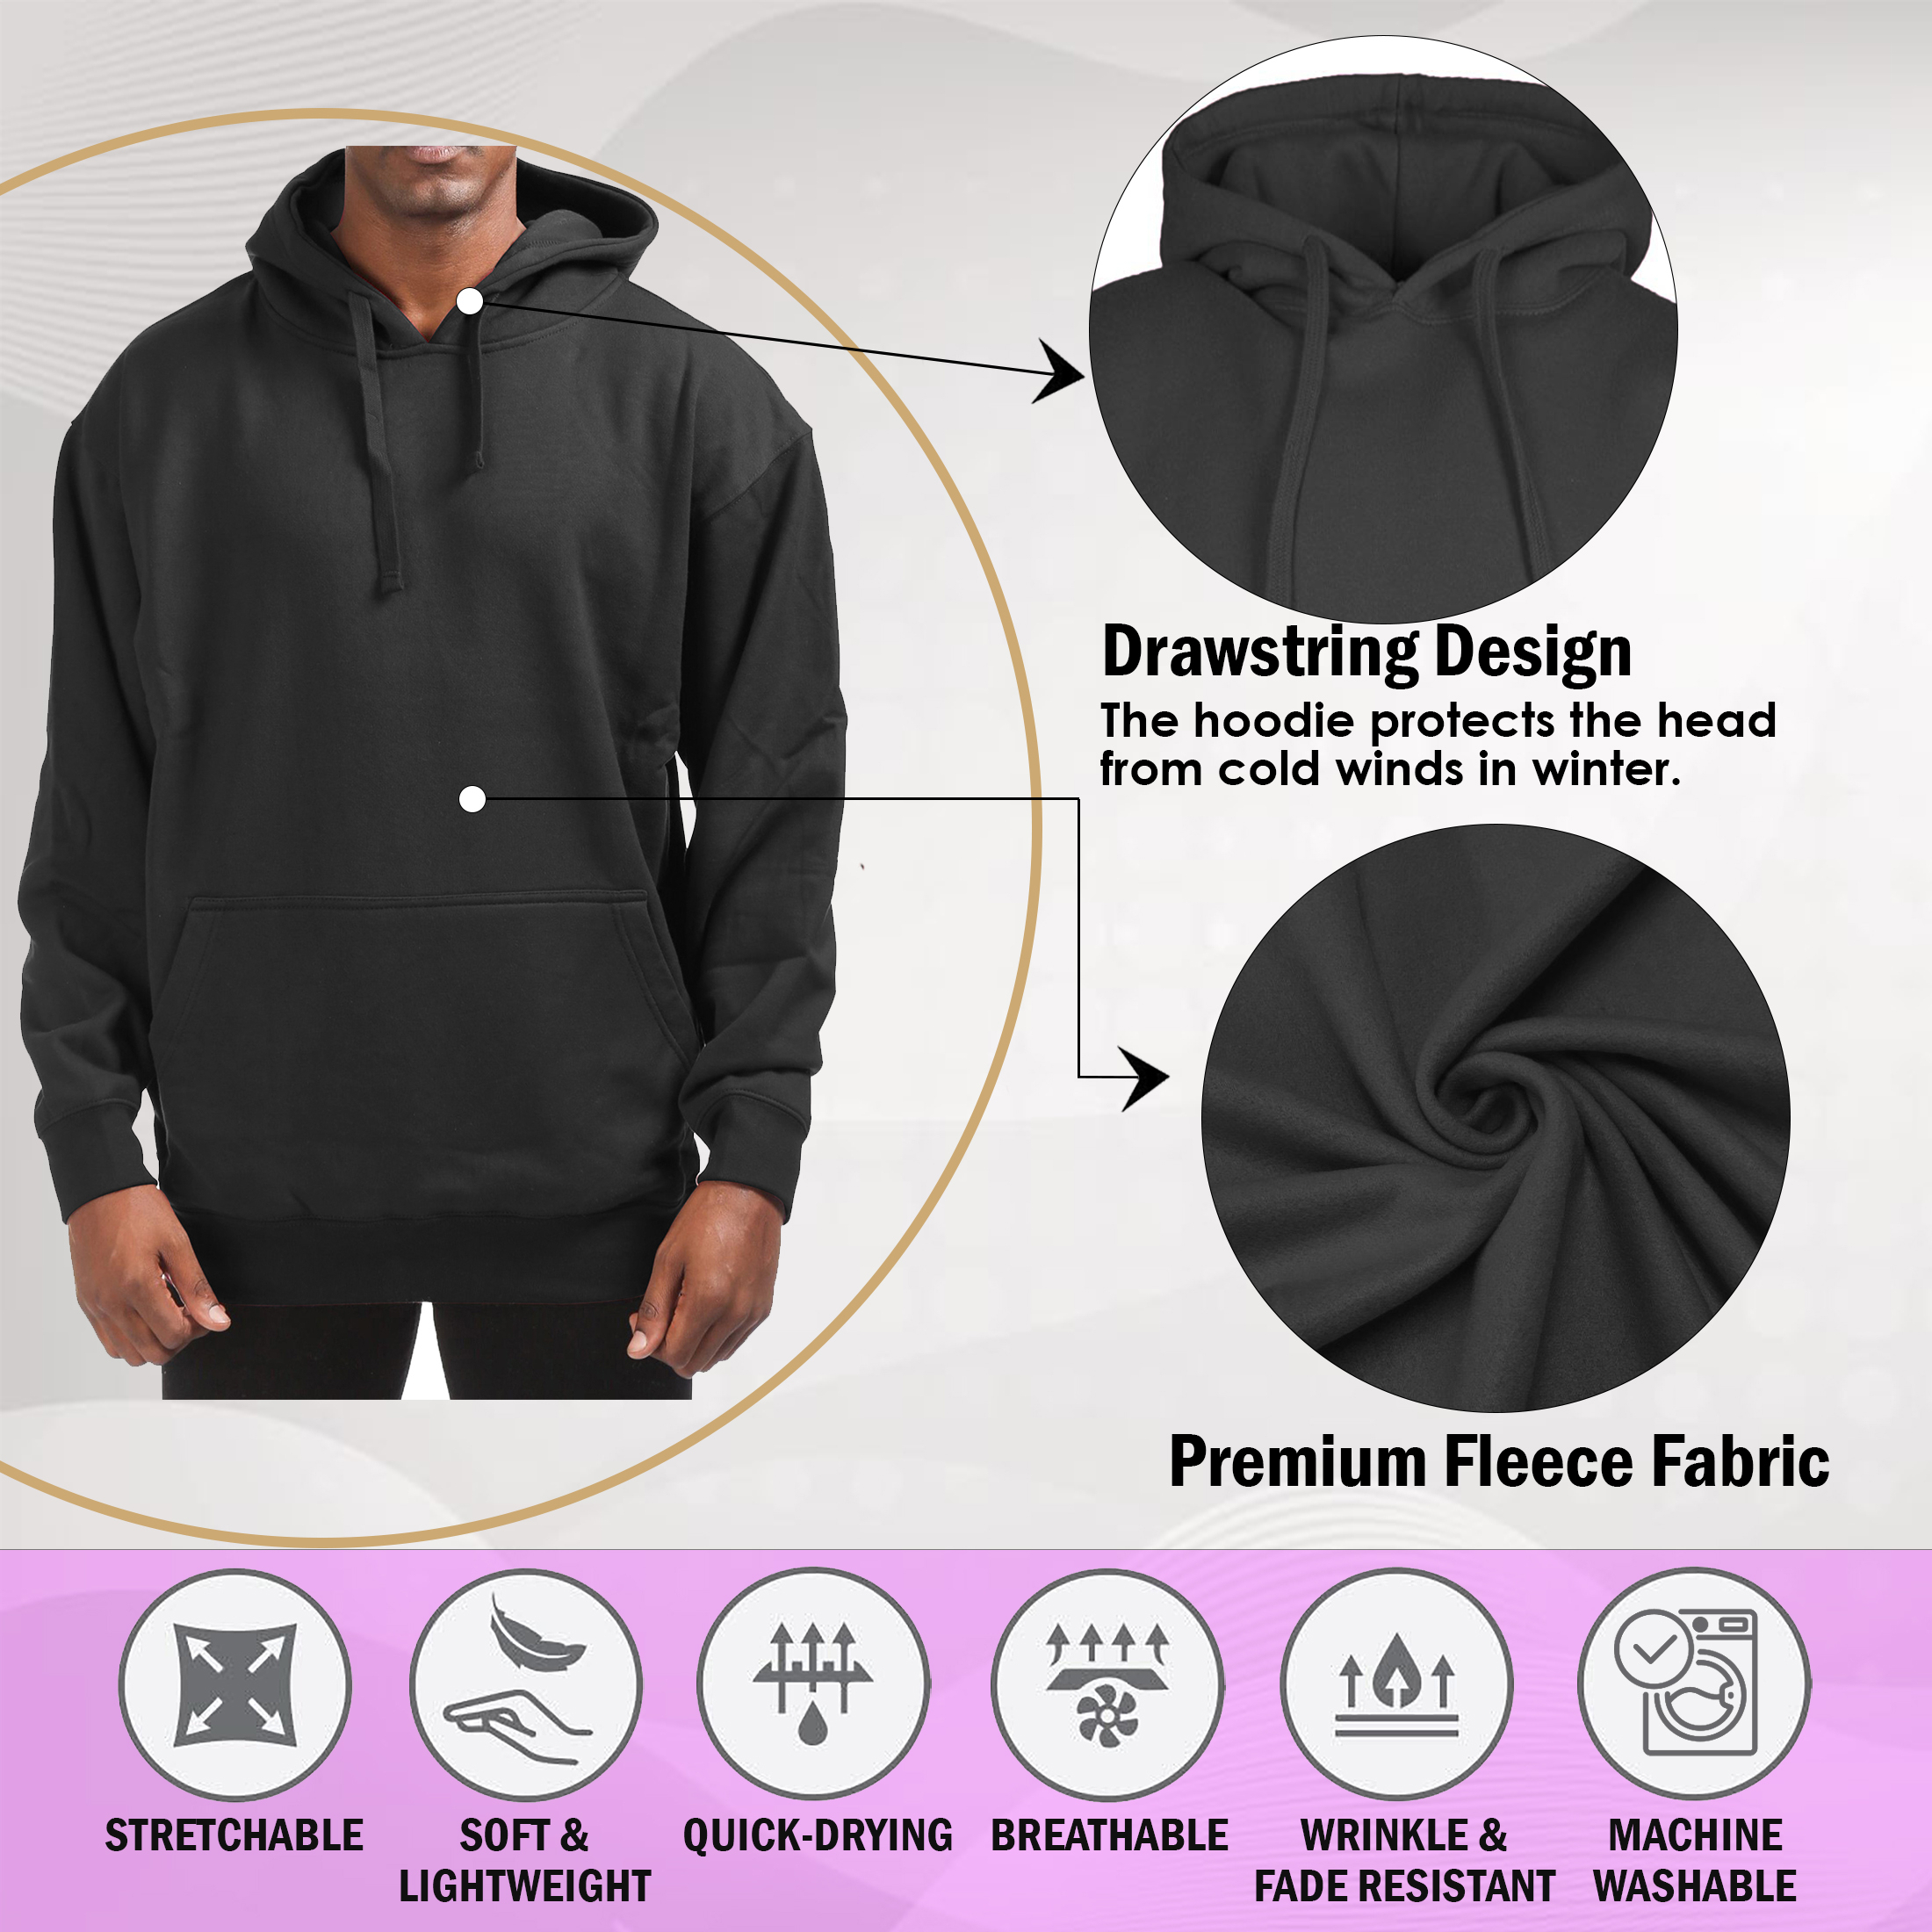 Men's Cotton-Blend Fleece Pullover Hoodie With Pocket (Big & Tall Sizes Available) - Navy, 2X-Large